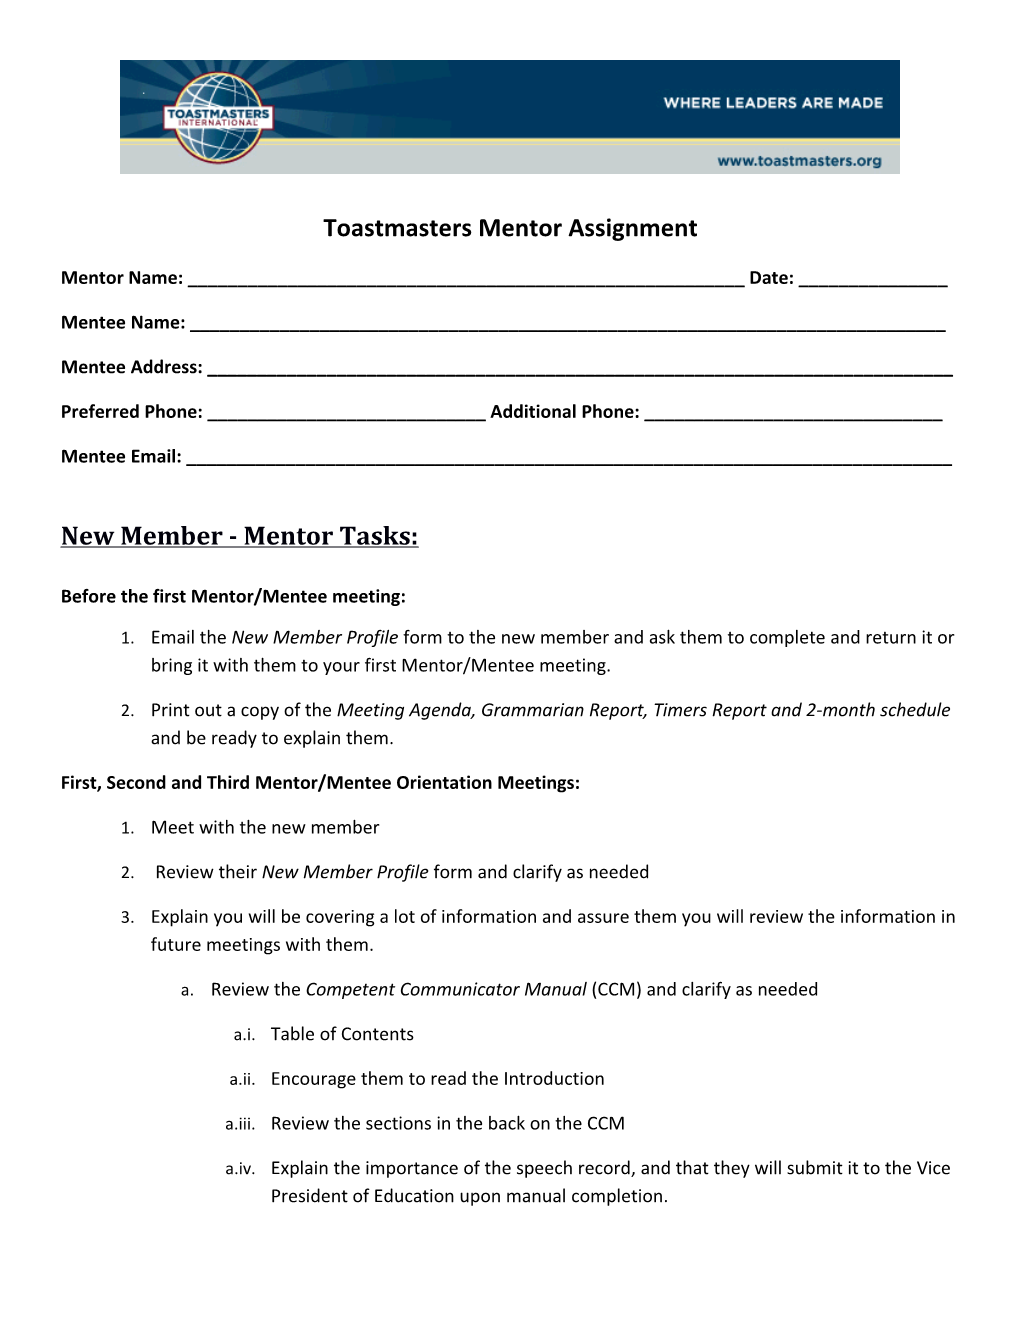 Toastmasters Mentor Assignment